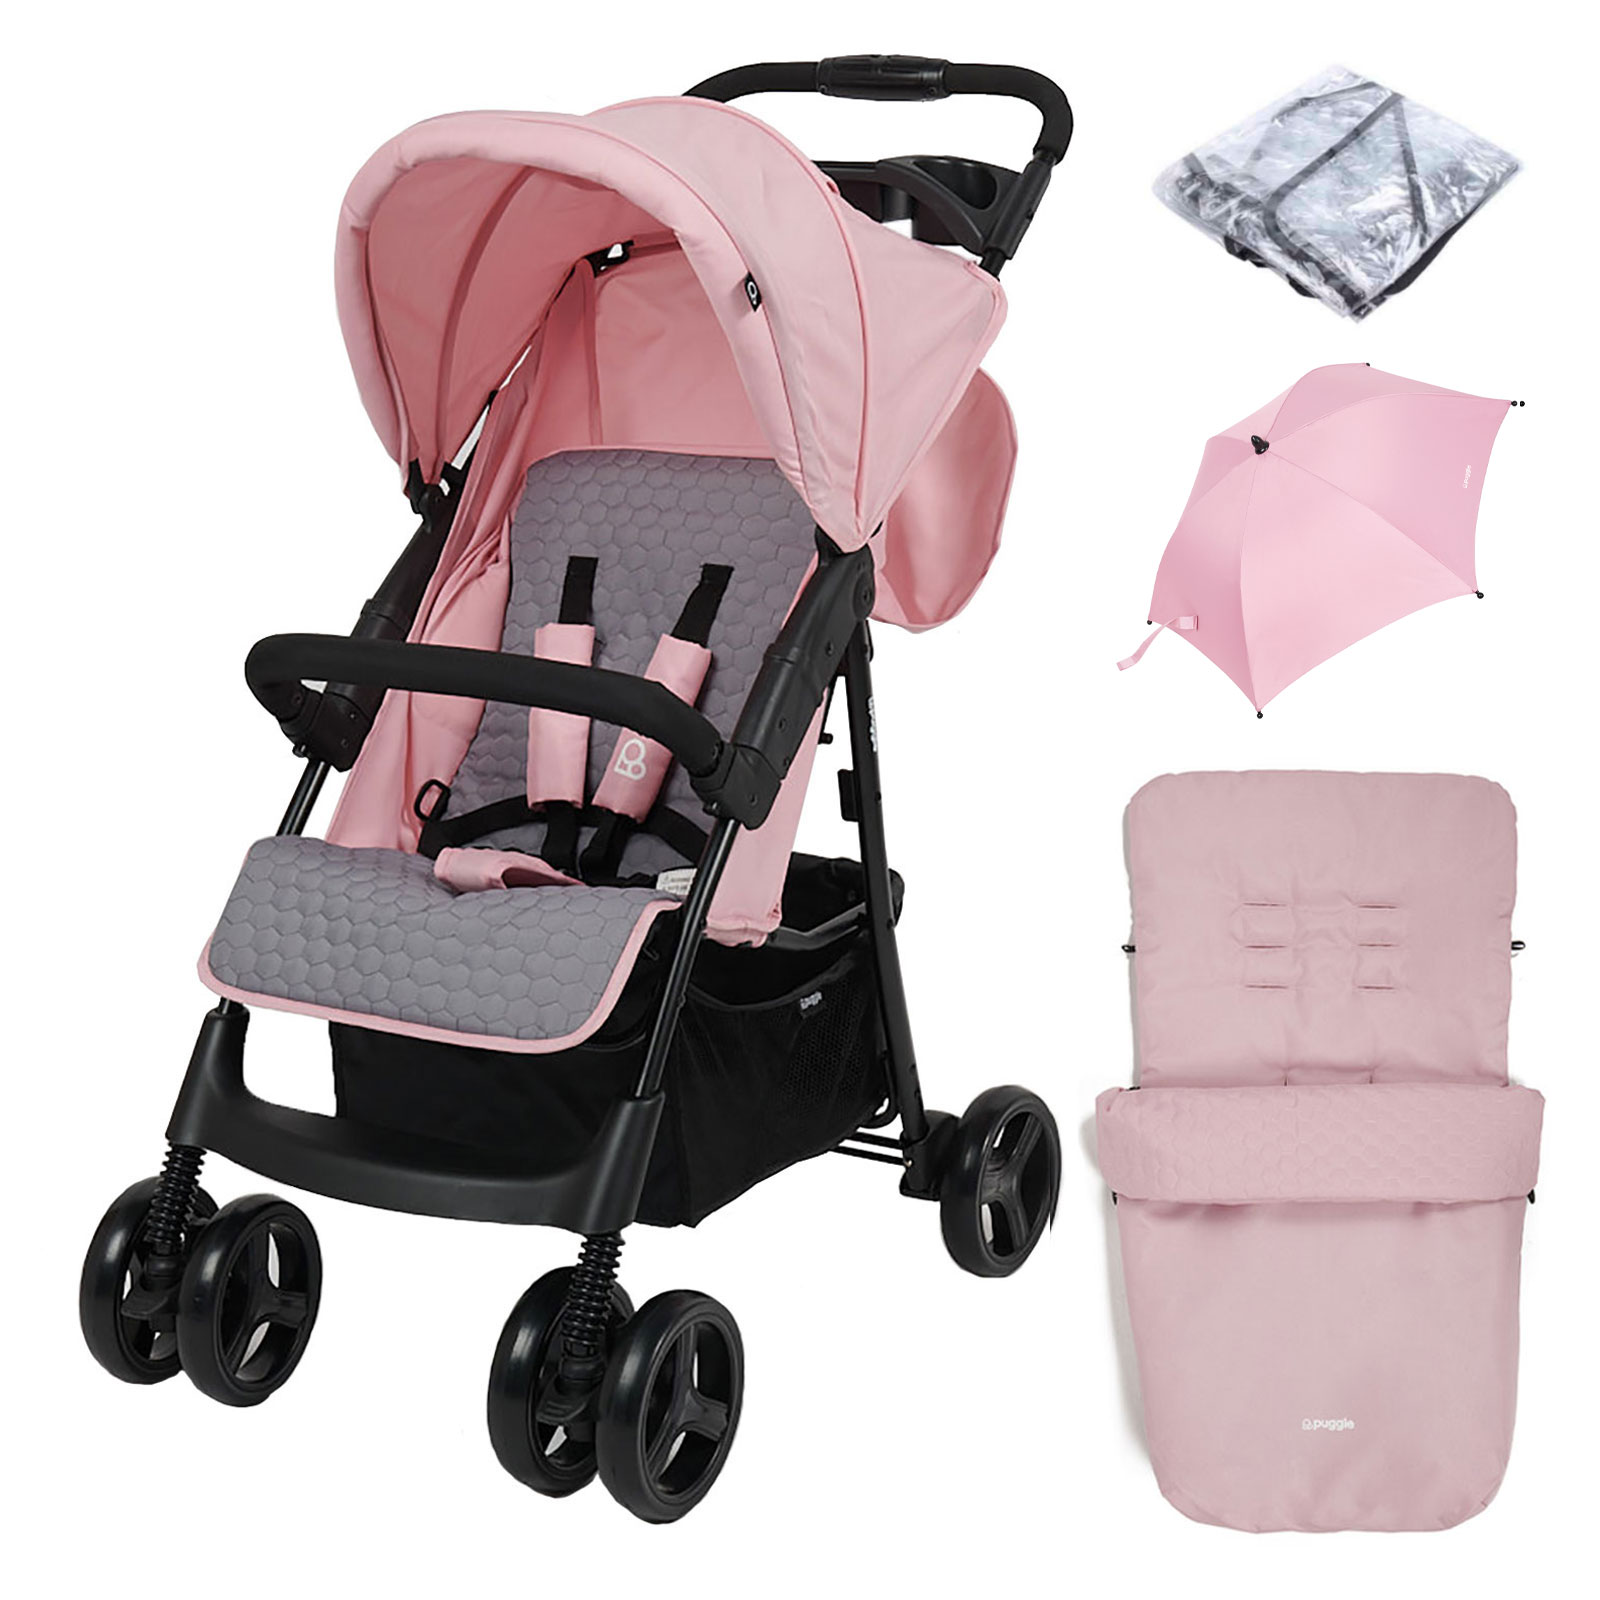 Puggle Starmax Pushchair Stroller with Raincover, Universal Footmuff and Parasol – Vintage Pink